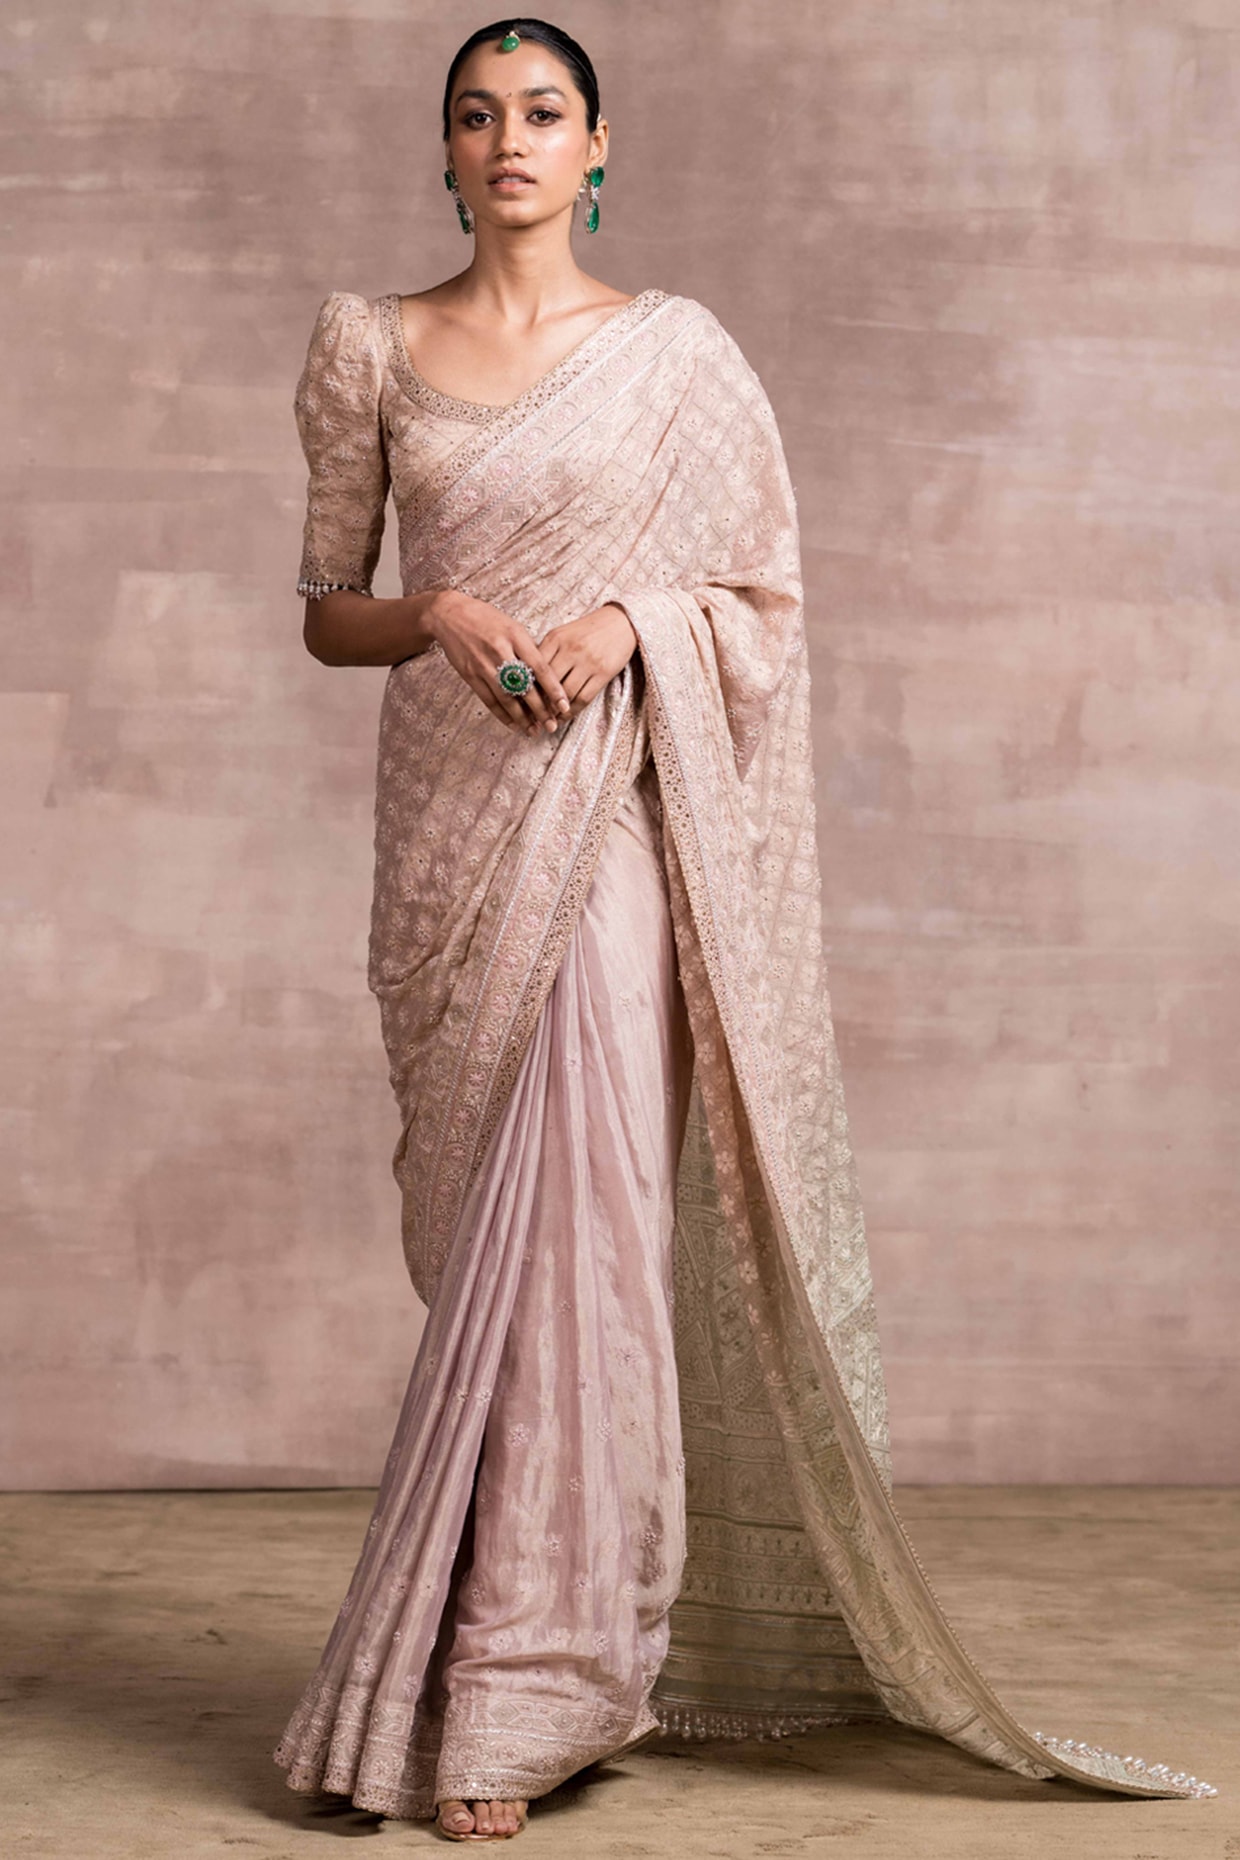 Buy Lucknowi Chikankari Saree Online at Best Price : Free Delivery